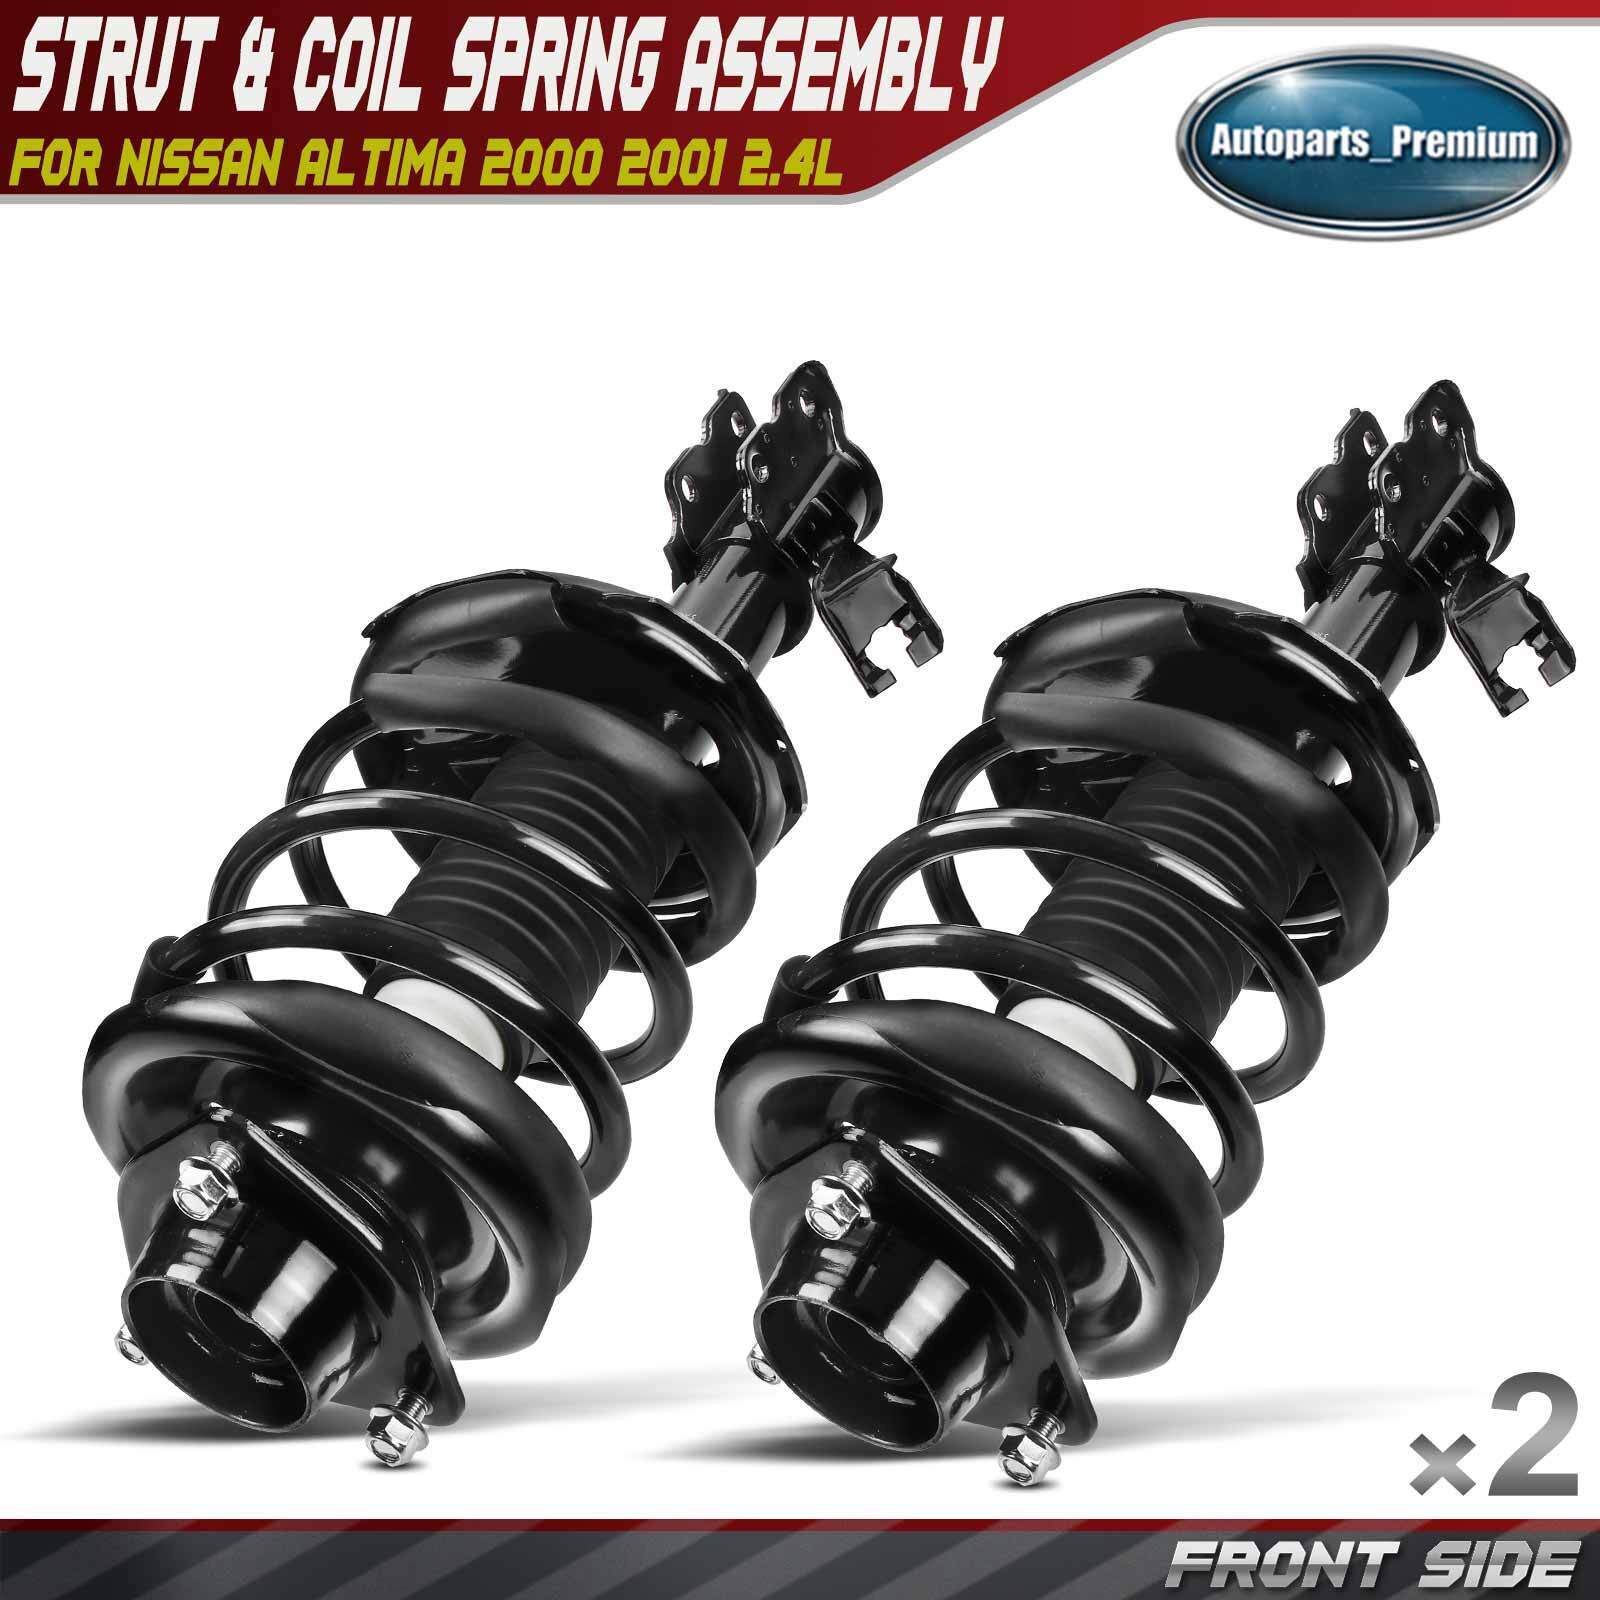 2x Front Complete Strut & Coil Spring Assembly for Nissan Altima 2000 2001 2.4L